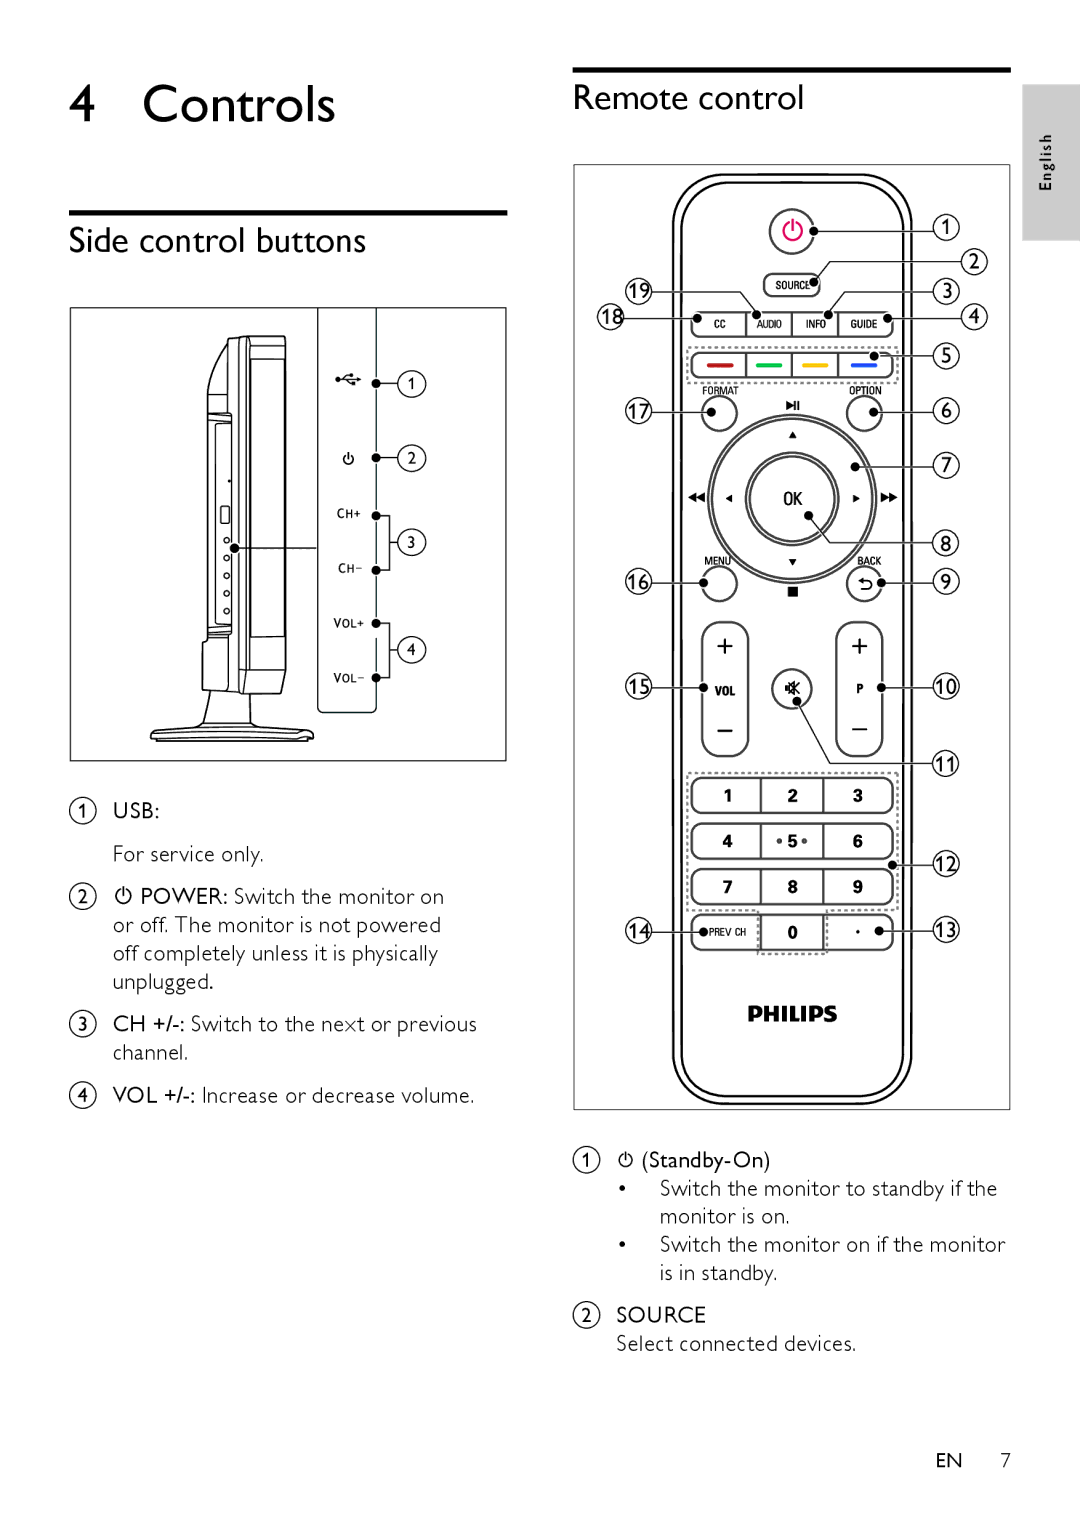 Philips 191TV4L user manual Controls, Side control buttons, Remote control, Select connected devices 